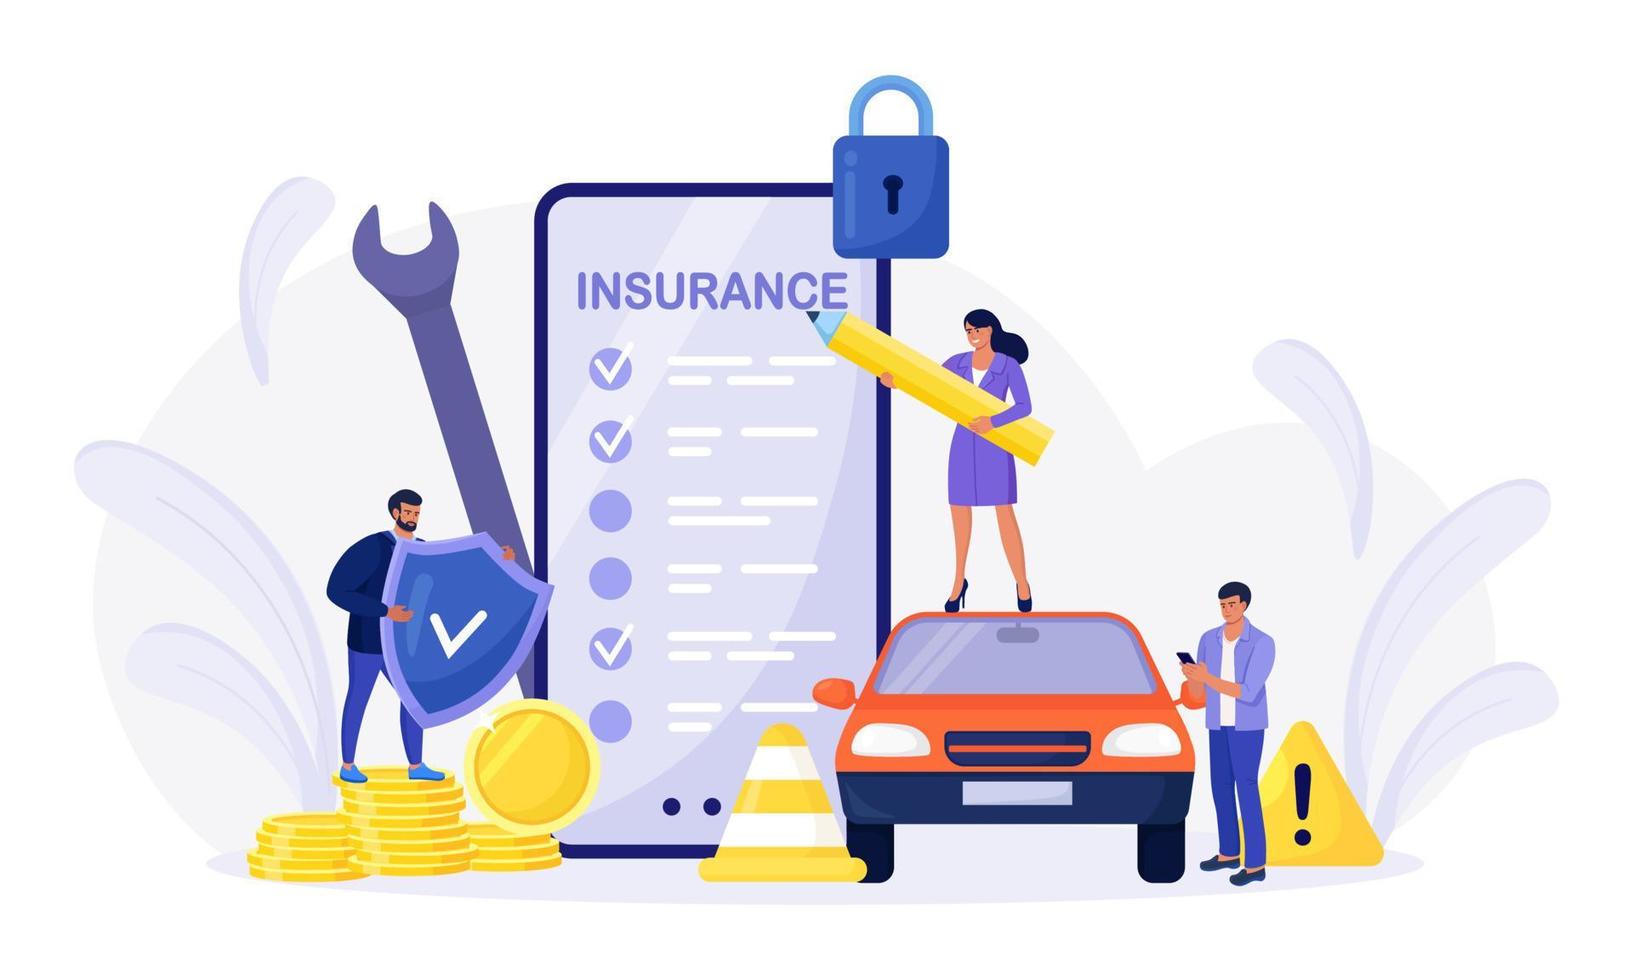 Car insurance policy form on phone screen. Insurance agent or salesman providing security document. People buying auto, leasing Protection, warranty of vehicle from accident, damage or collision vector